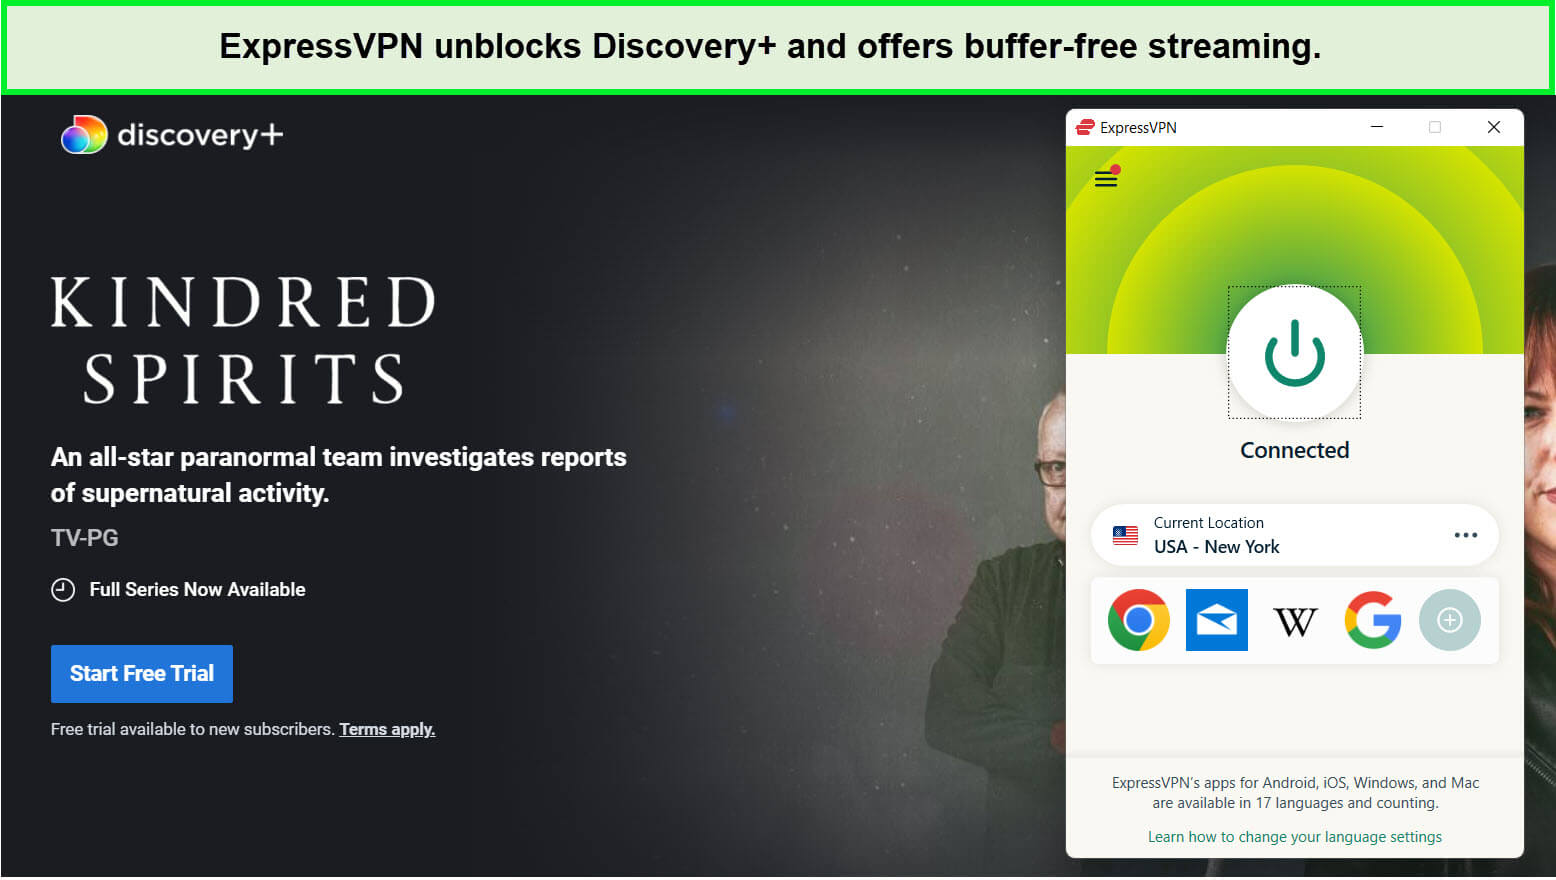 expressvpn-unblocks-us-discovery-plus-in-netherlands